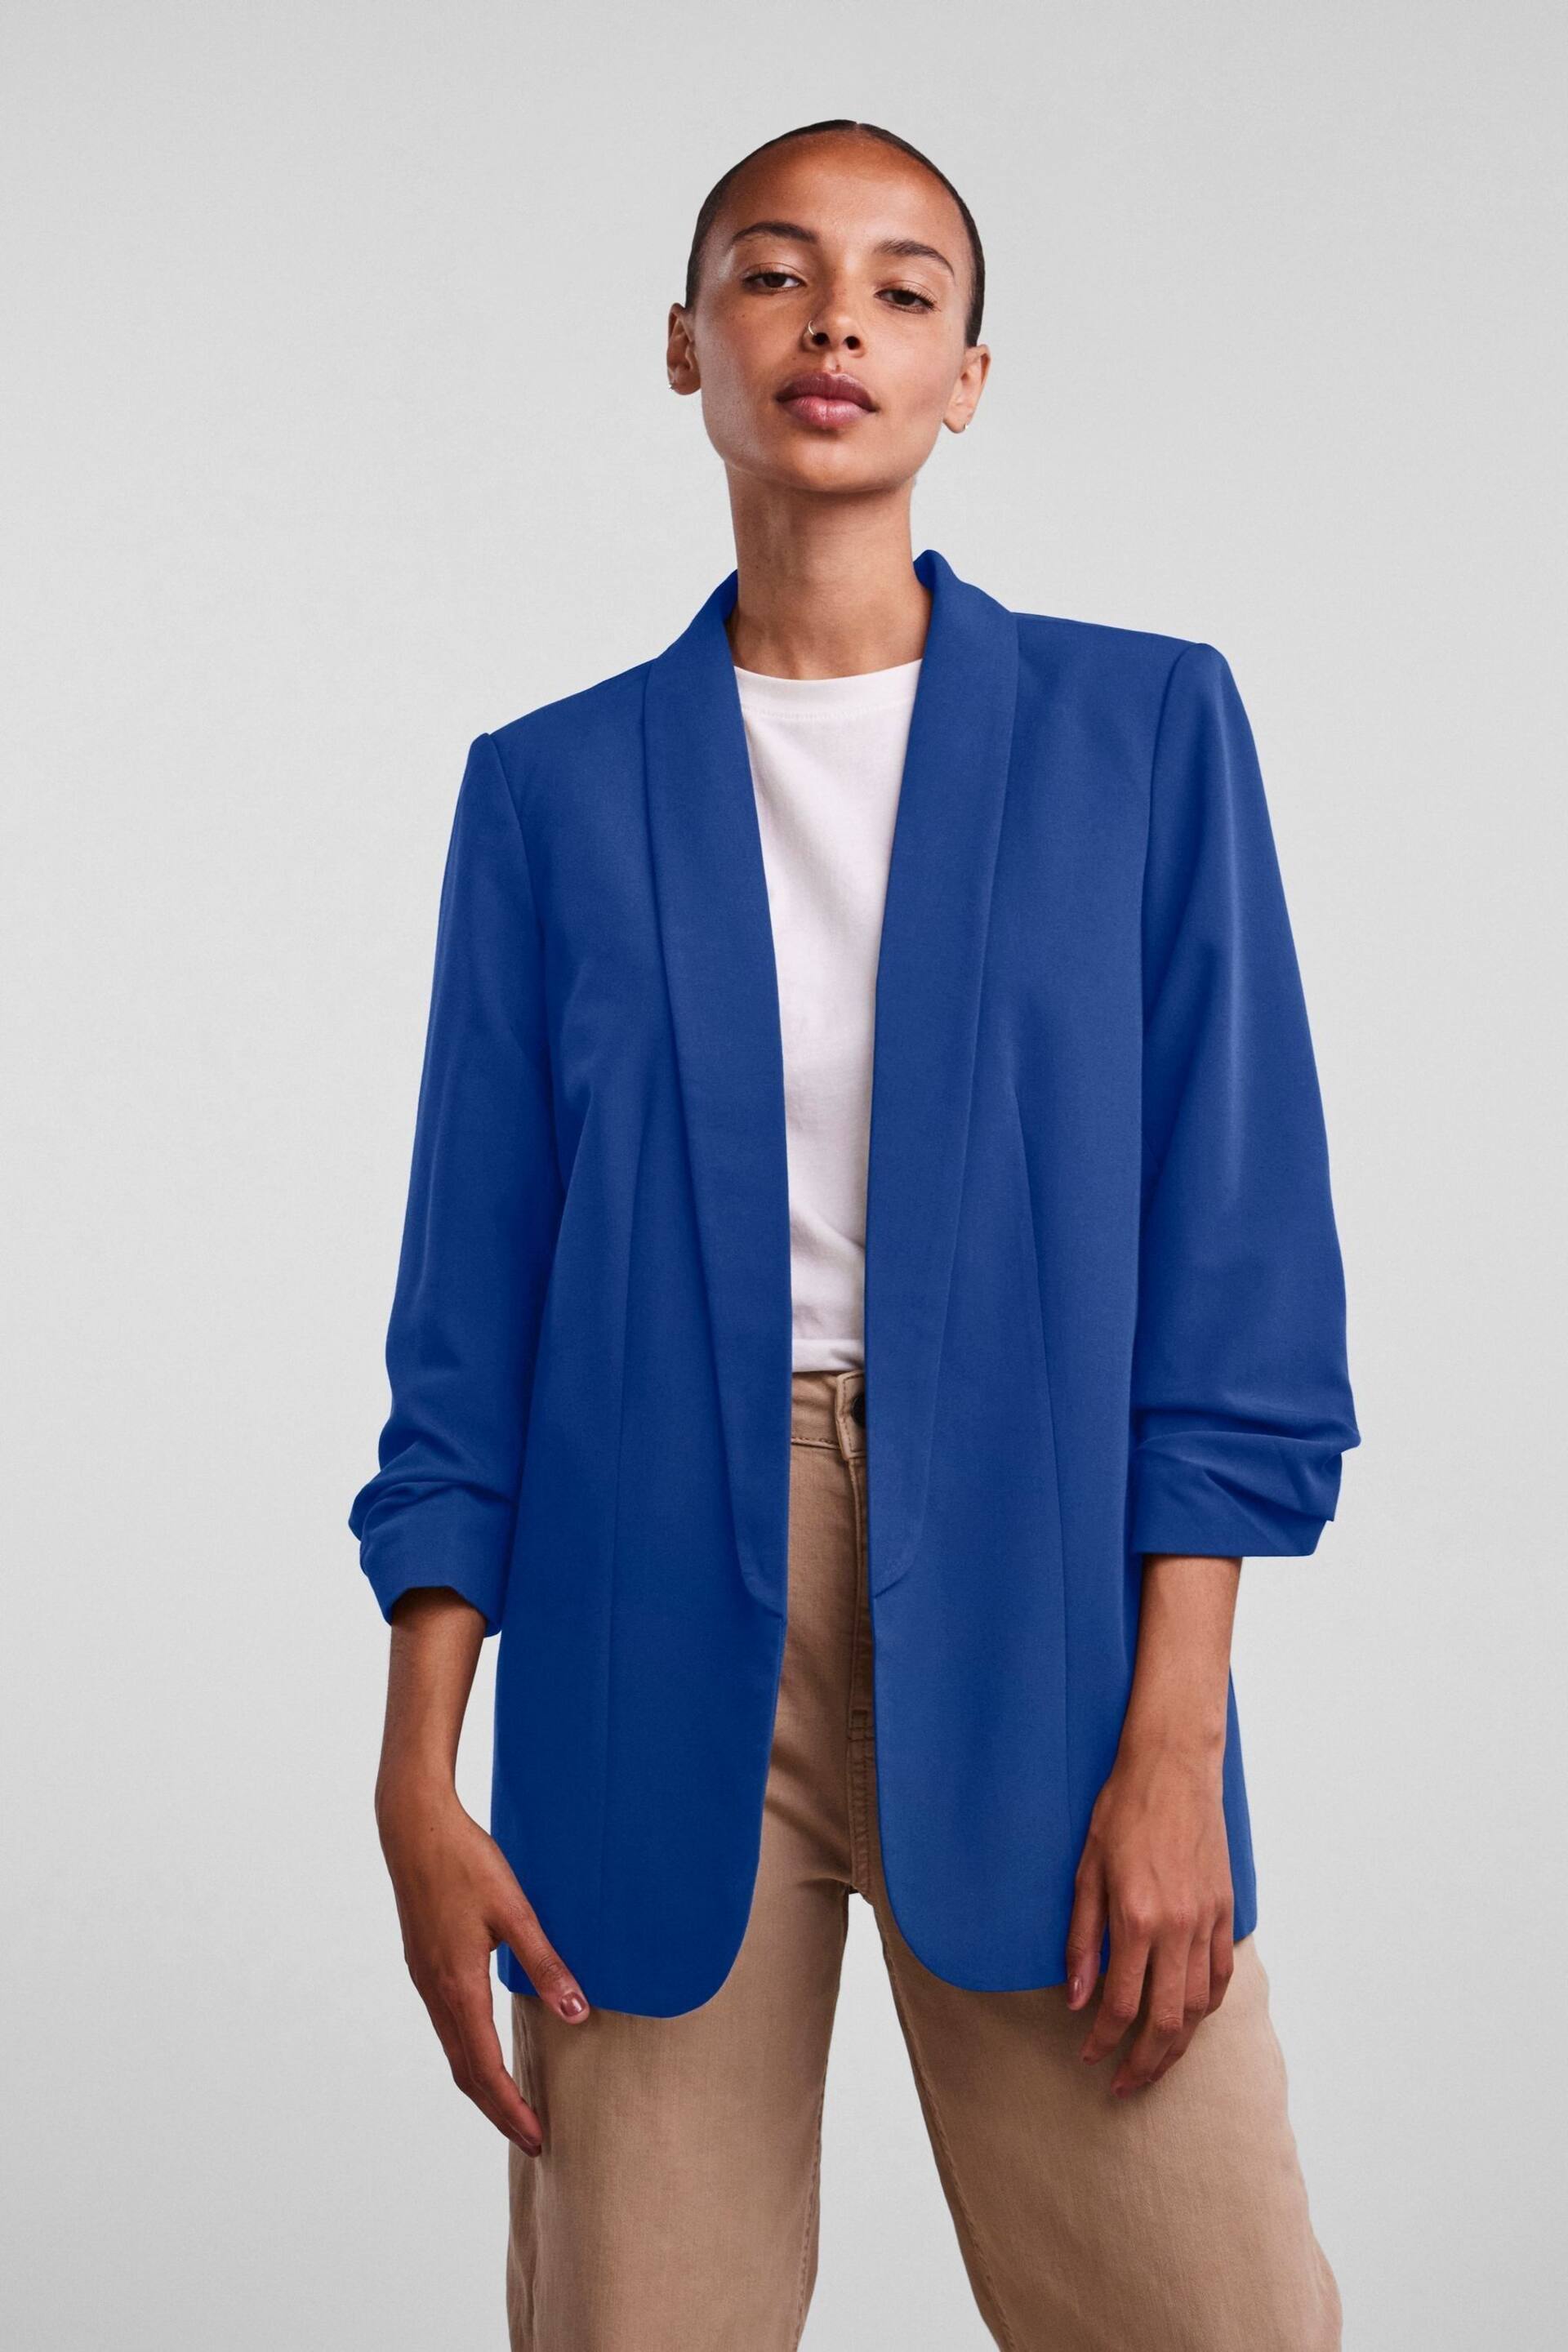 PIECES Blue Relaxed Ruched Sleeve Workwear Blazer - Image 1 of 6